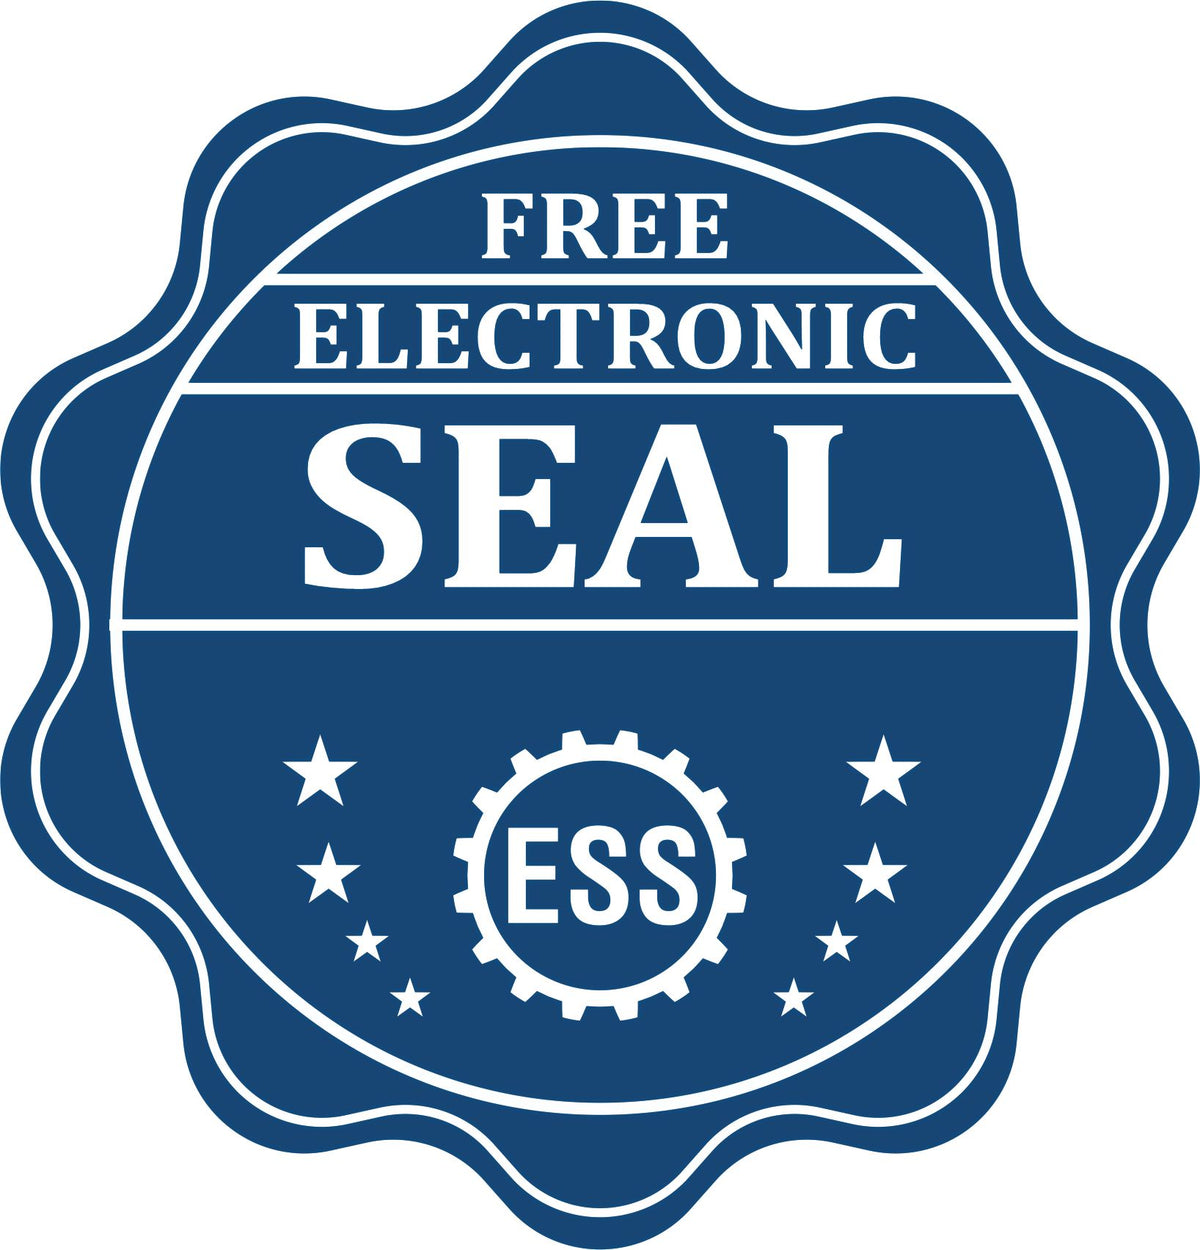 A badge showing a free electronic seal for the Handheld Hawaii Professional Engineer Embosser with stars and the ESS gear on the emblem.